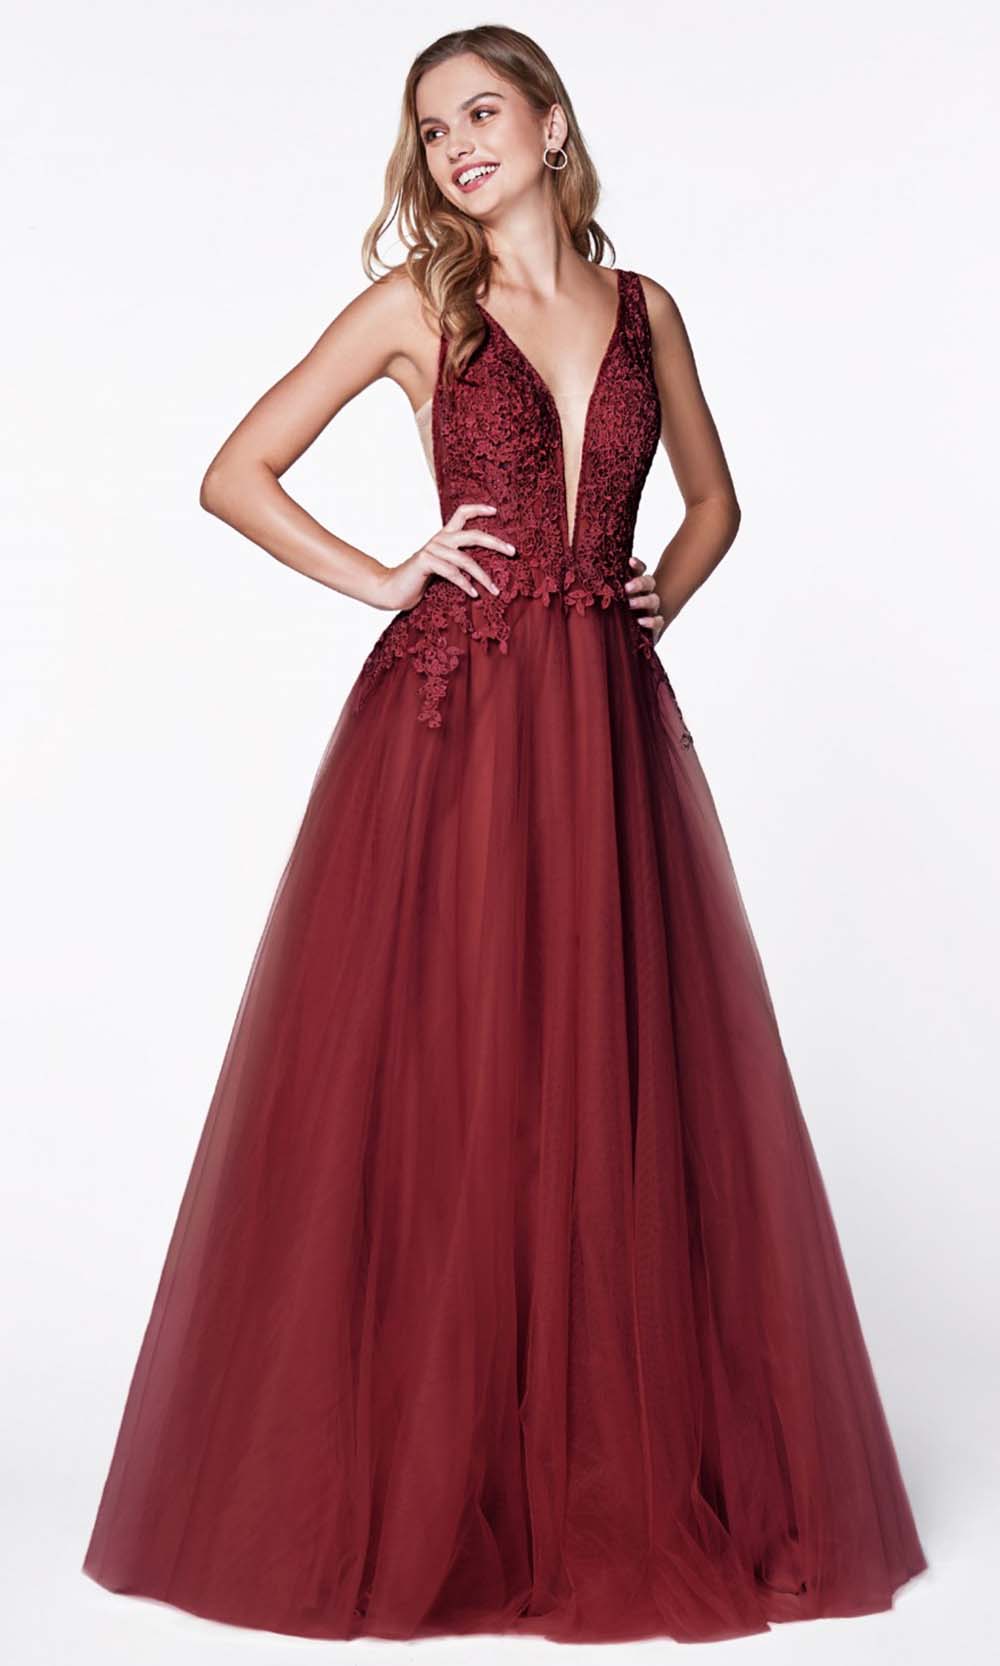 Cinderella Divine - CJ511 Jeweled Lace Tulle A-Line Dress In Red